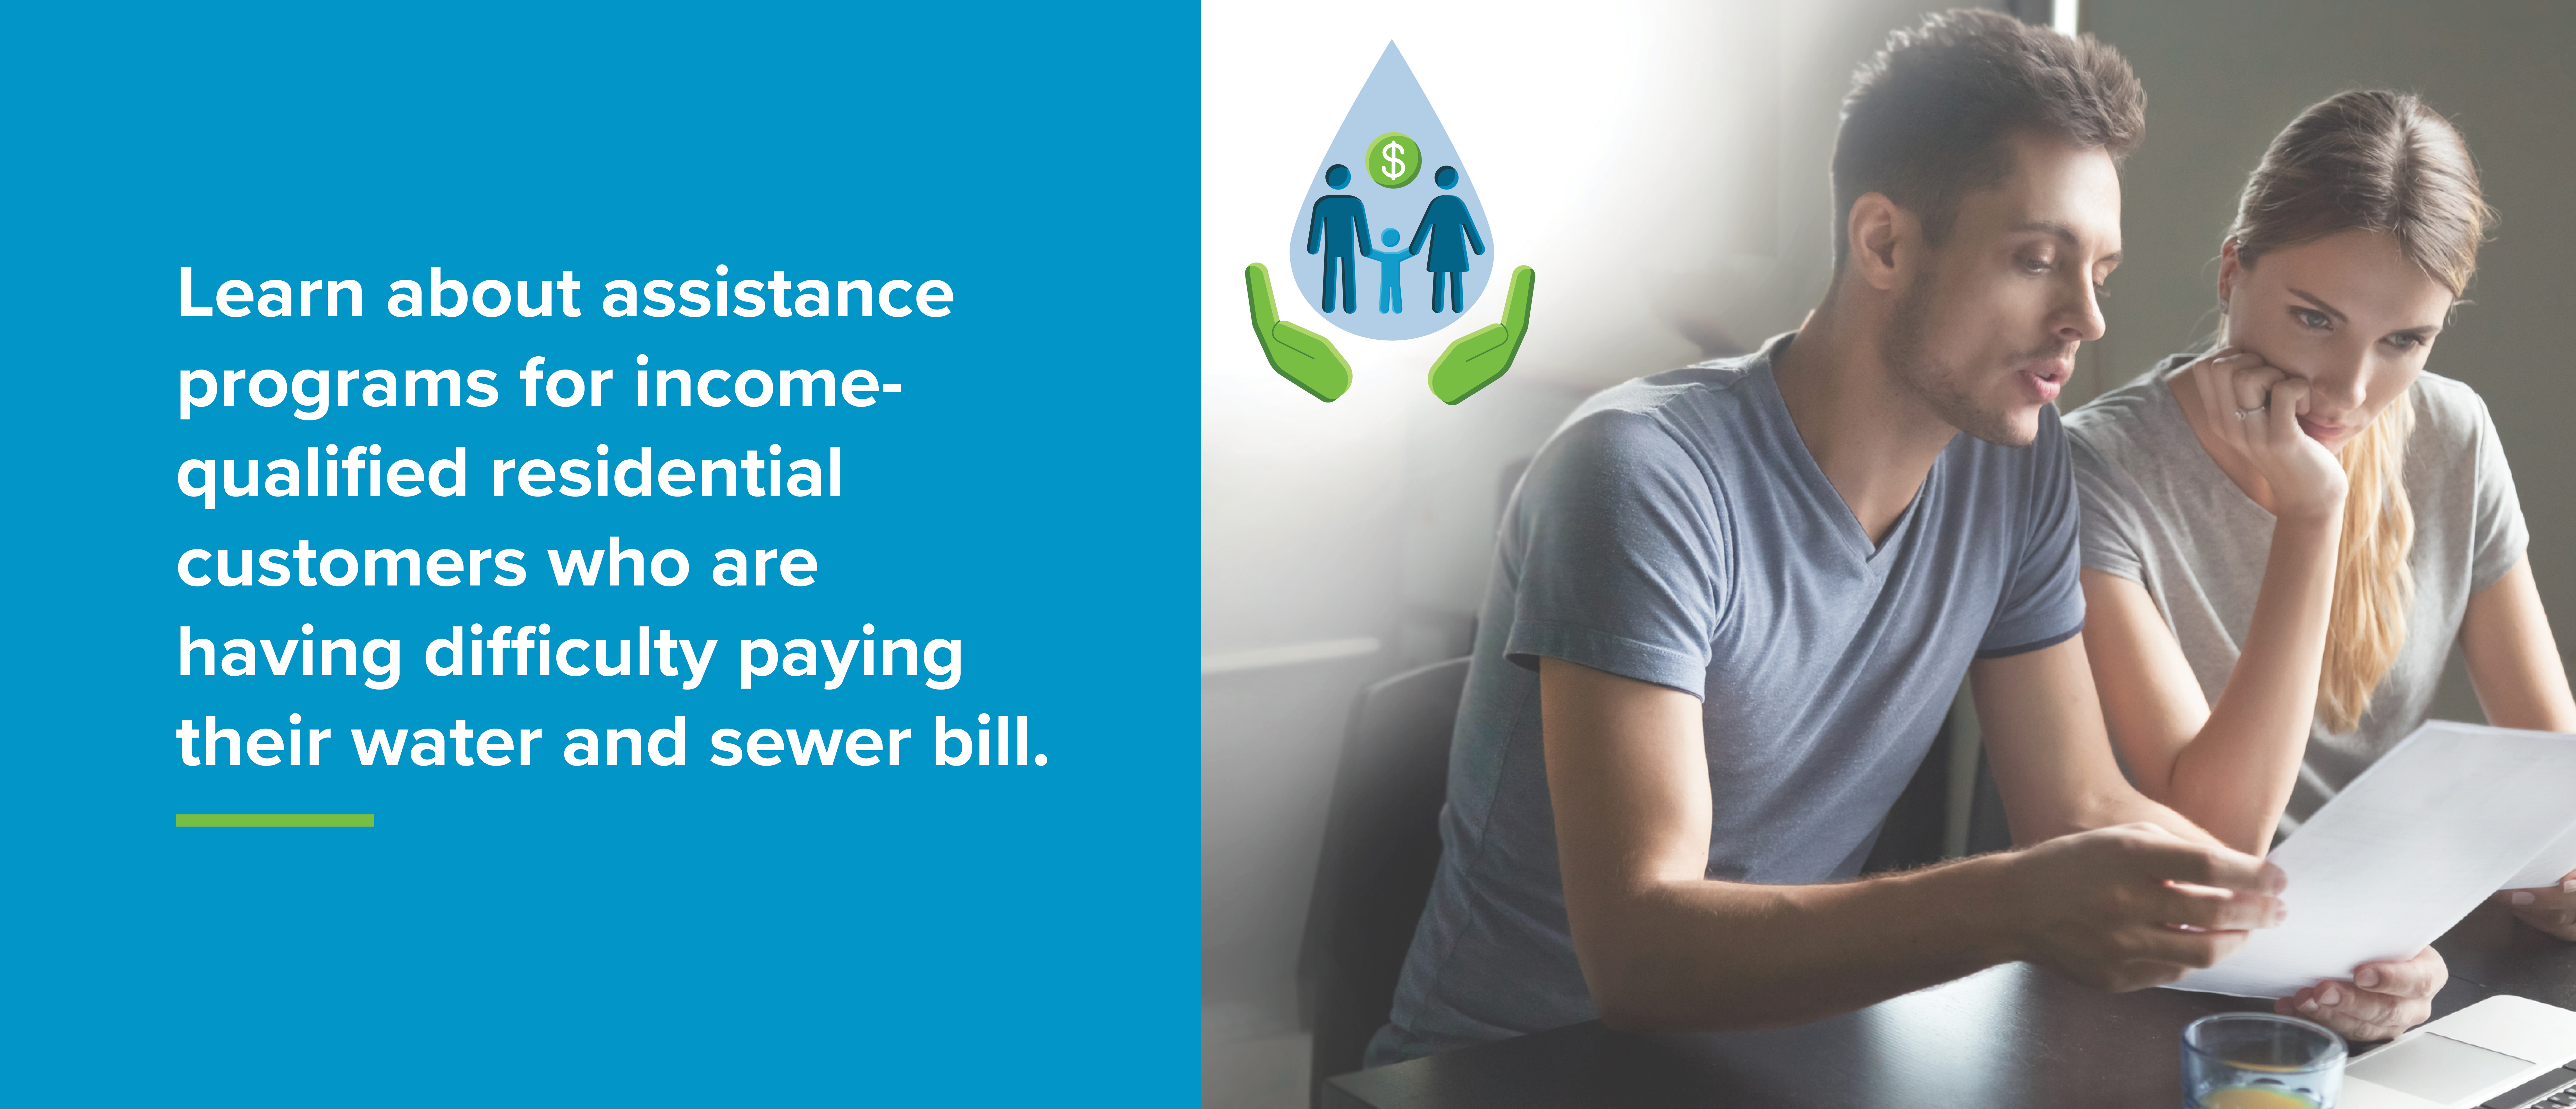 Image of a couple paying bills next to text that says learn about assistance programs for income-qualified residential customers who are having difficultly paying their water and sewer bill.